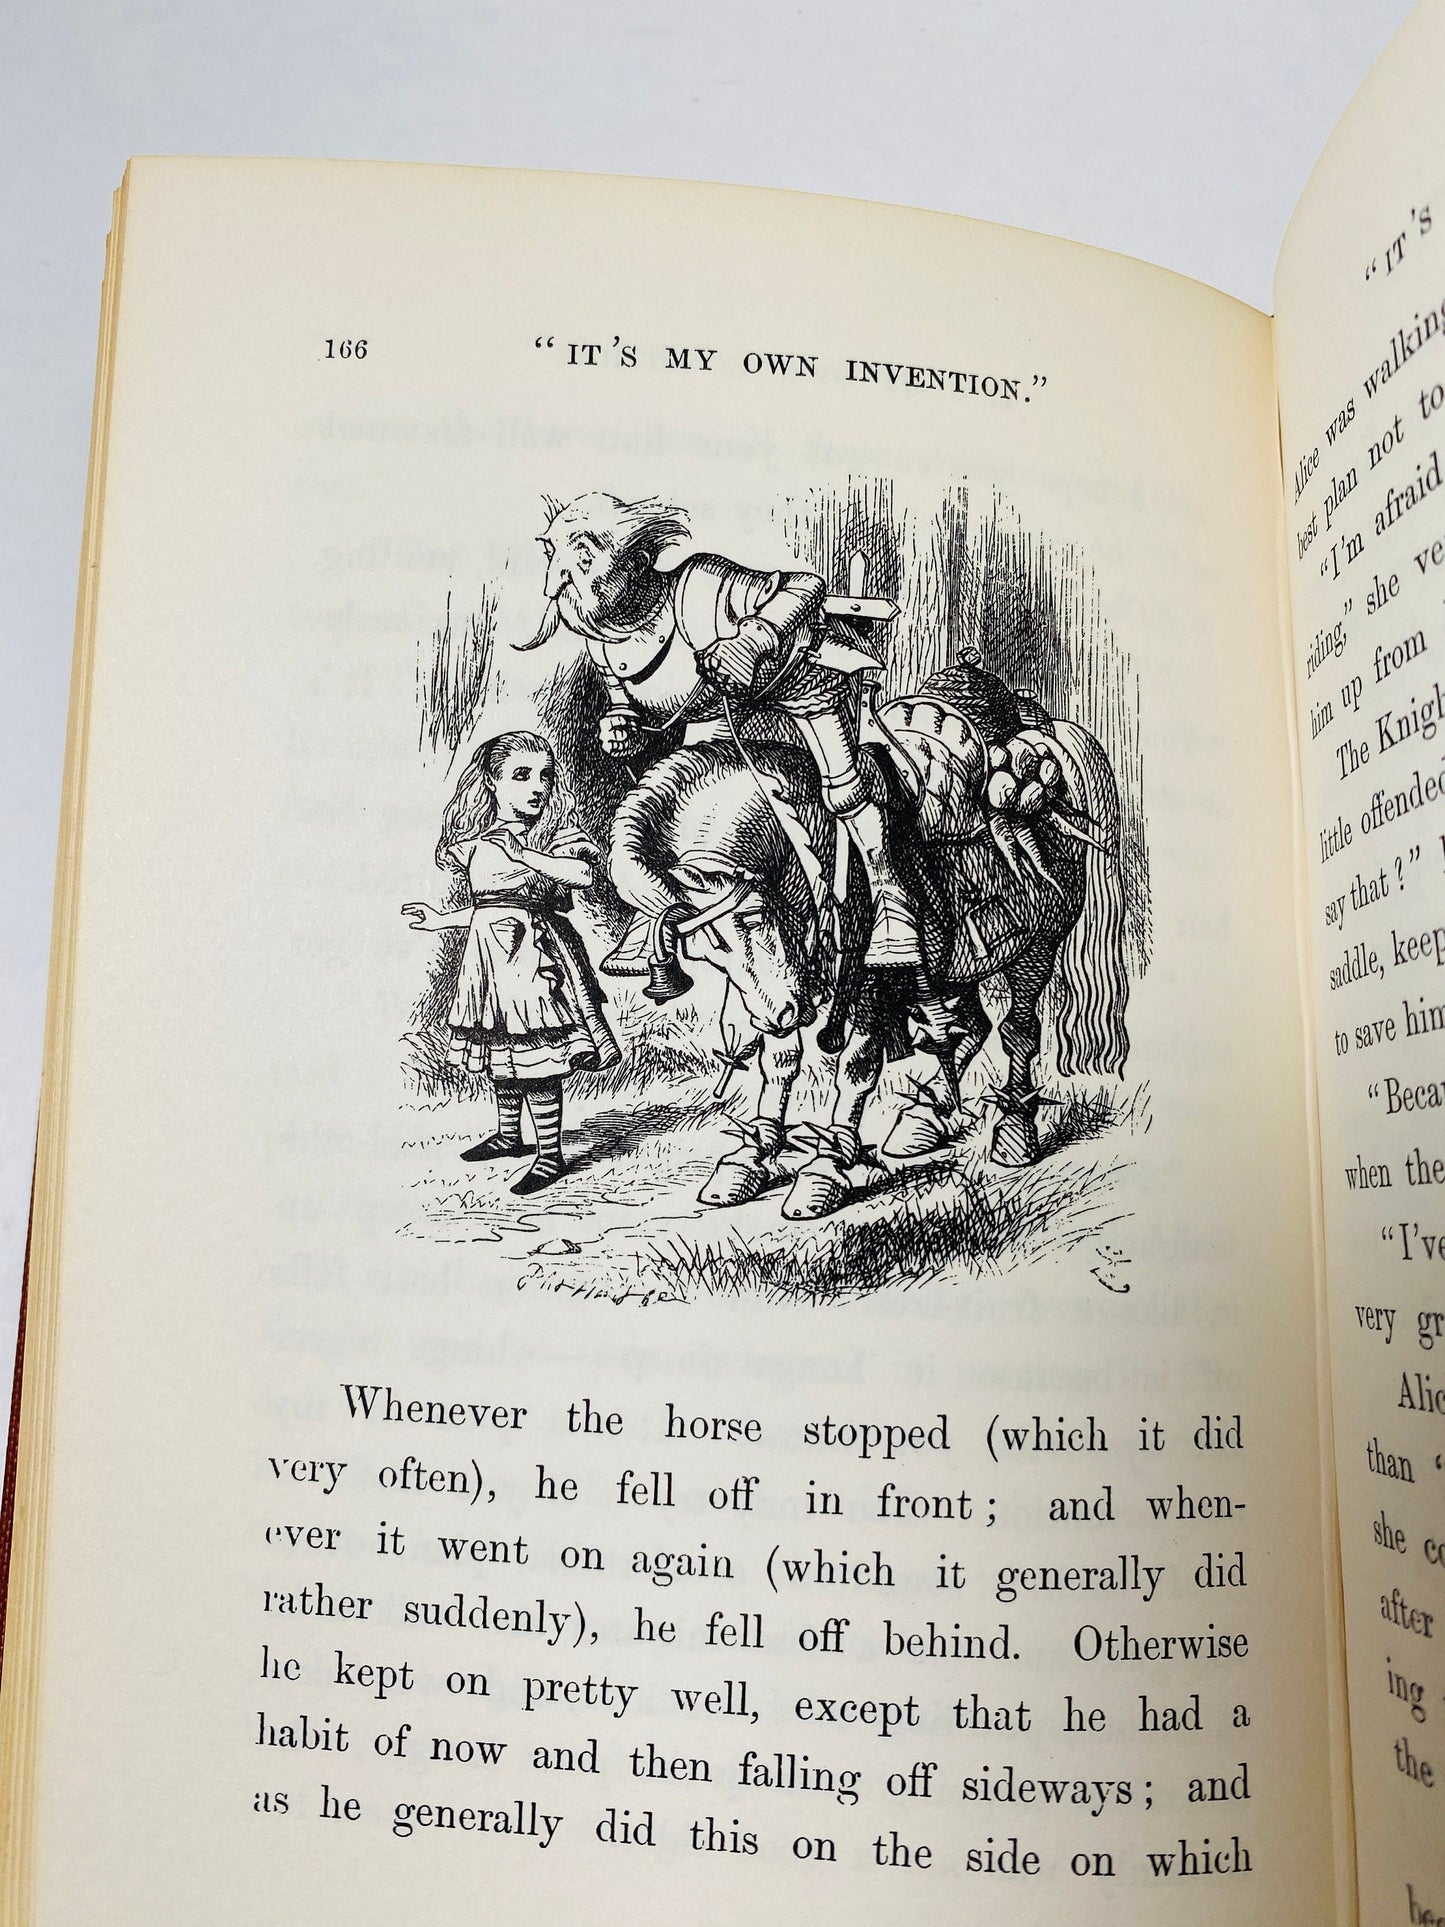 1930 Through the Looking-Glass and What Alice Found There by Lewis Carroll illustrated by John Tenniel London Macmillan